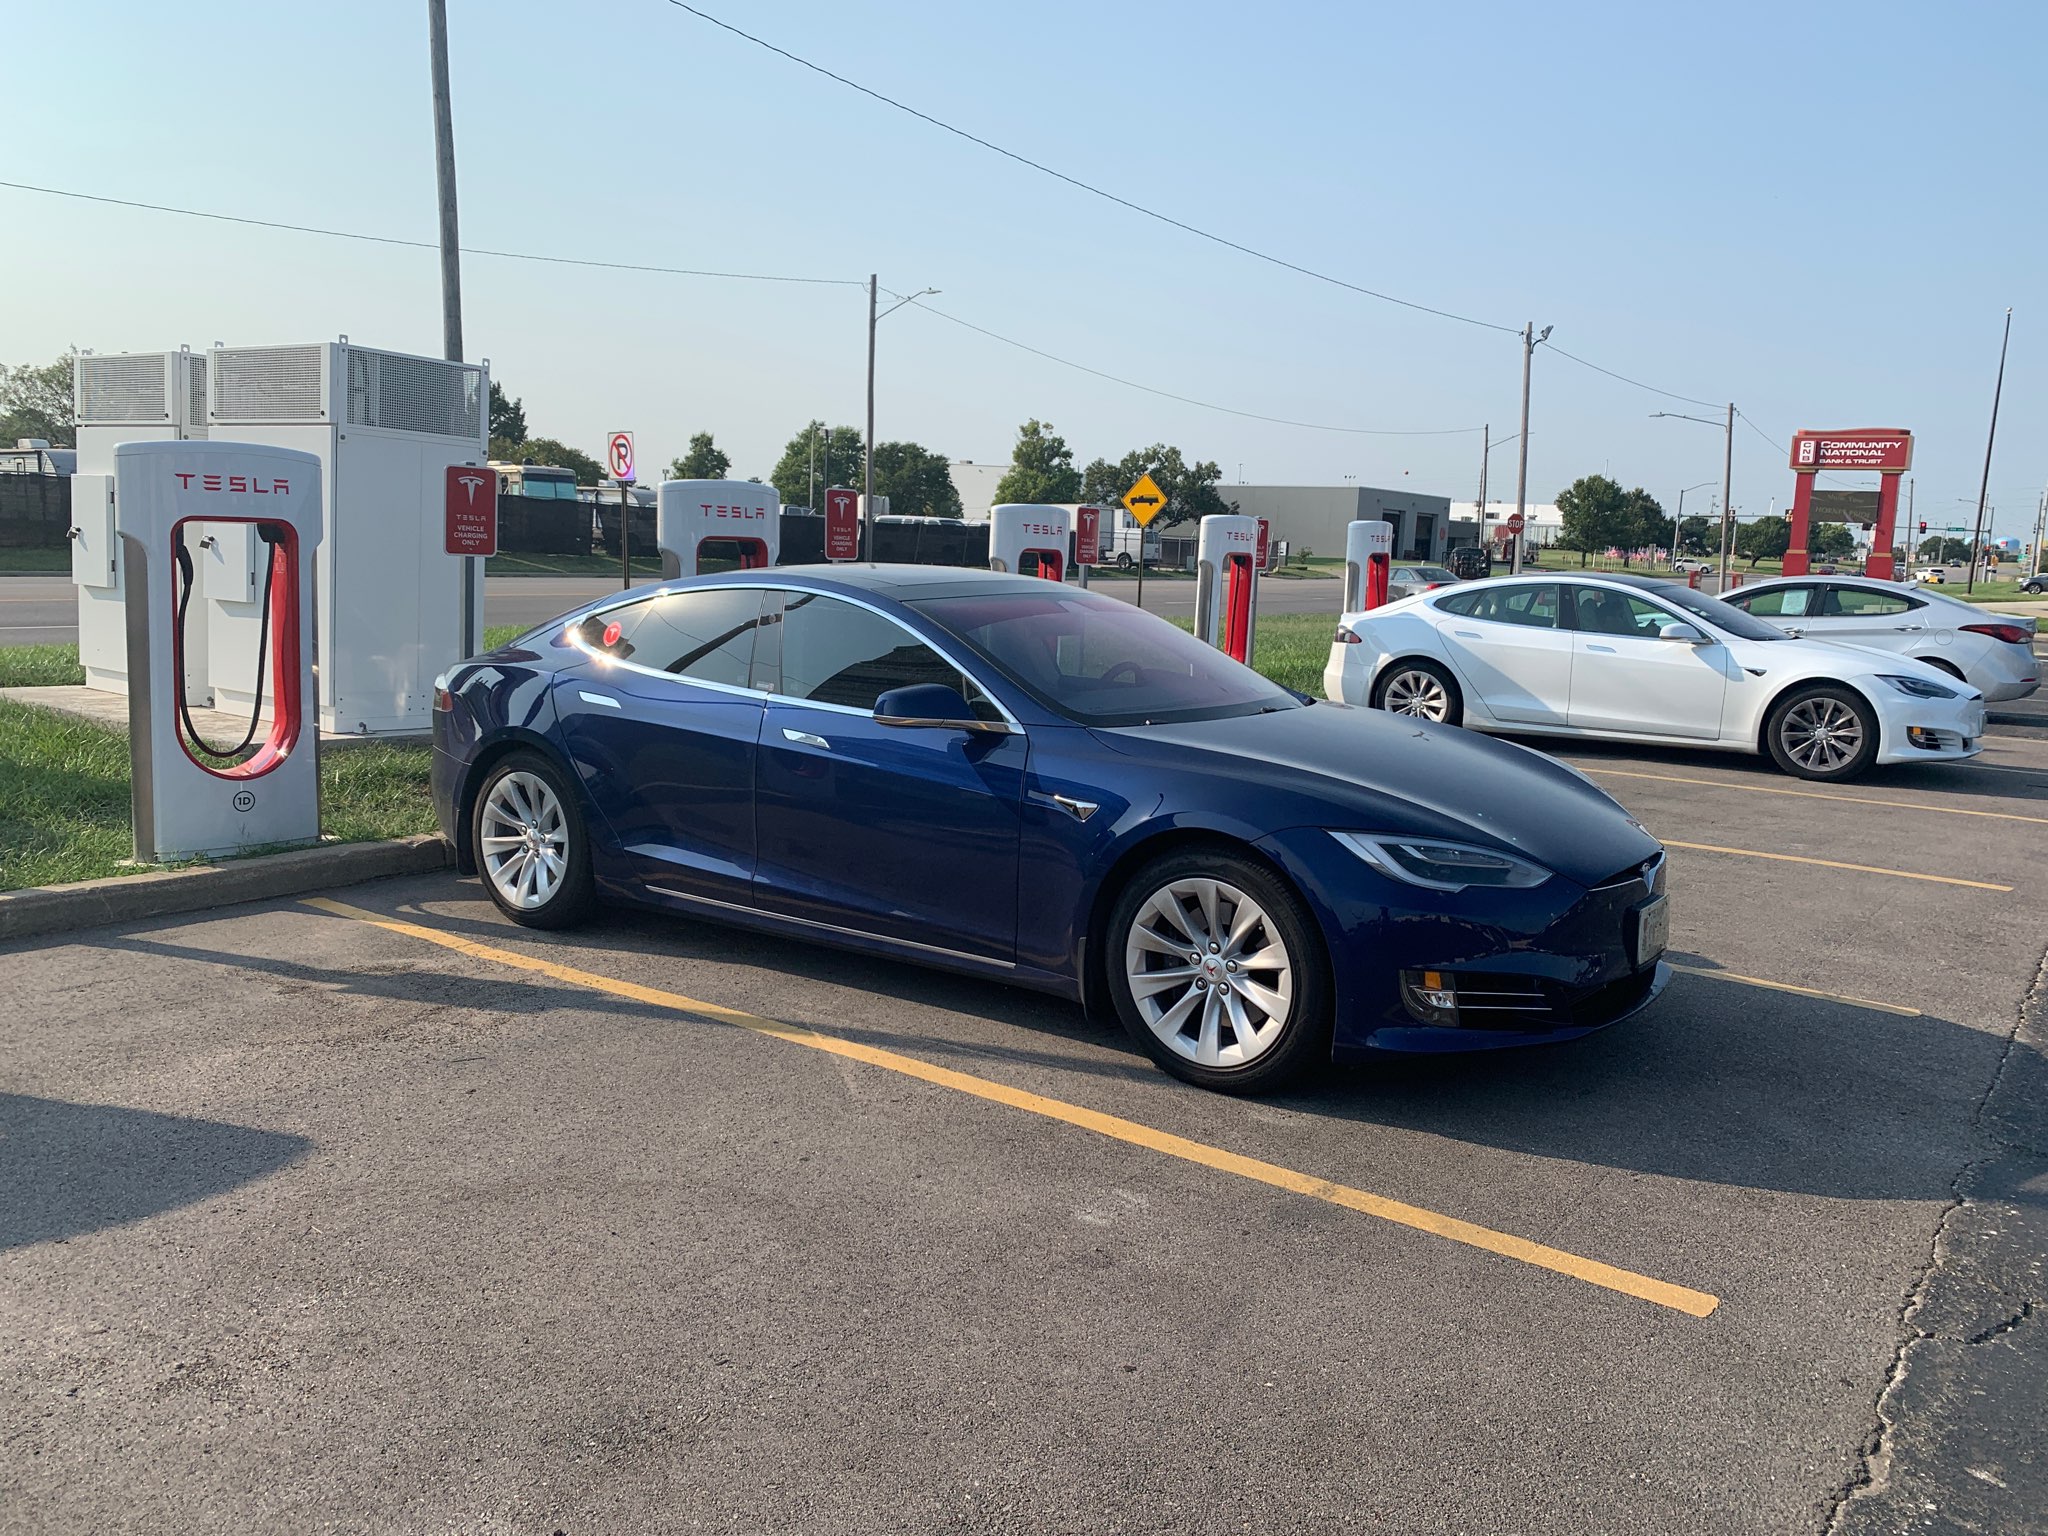 KDOT soliciting information on potential electric vehicle charging corridors